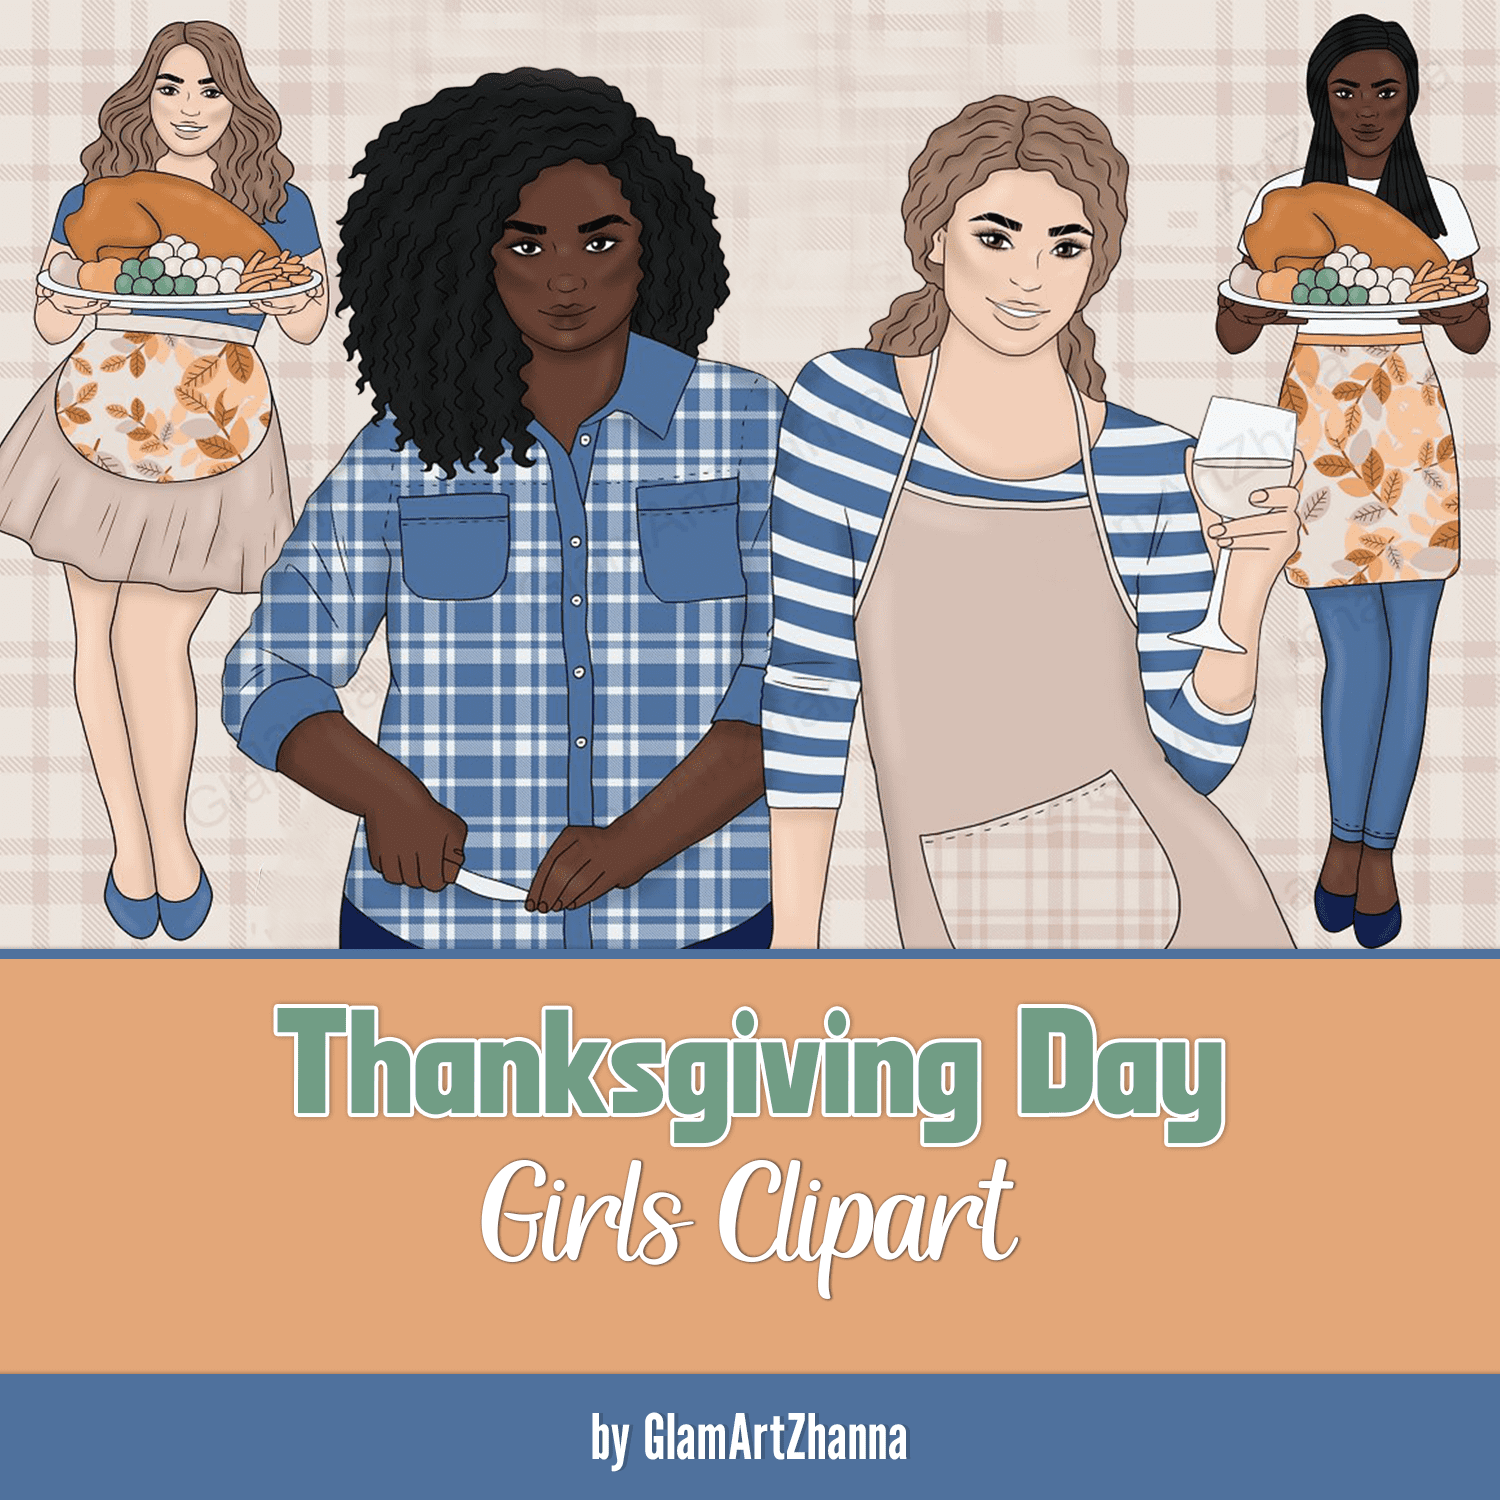 Thanksgiving Day Girls Clipart cover.